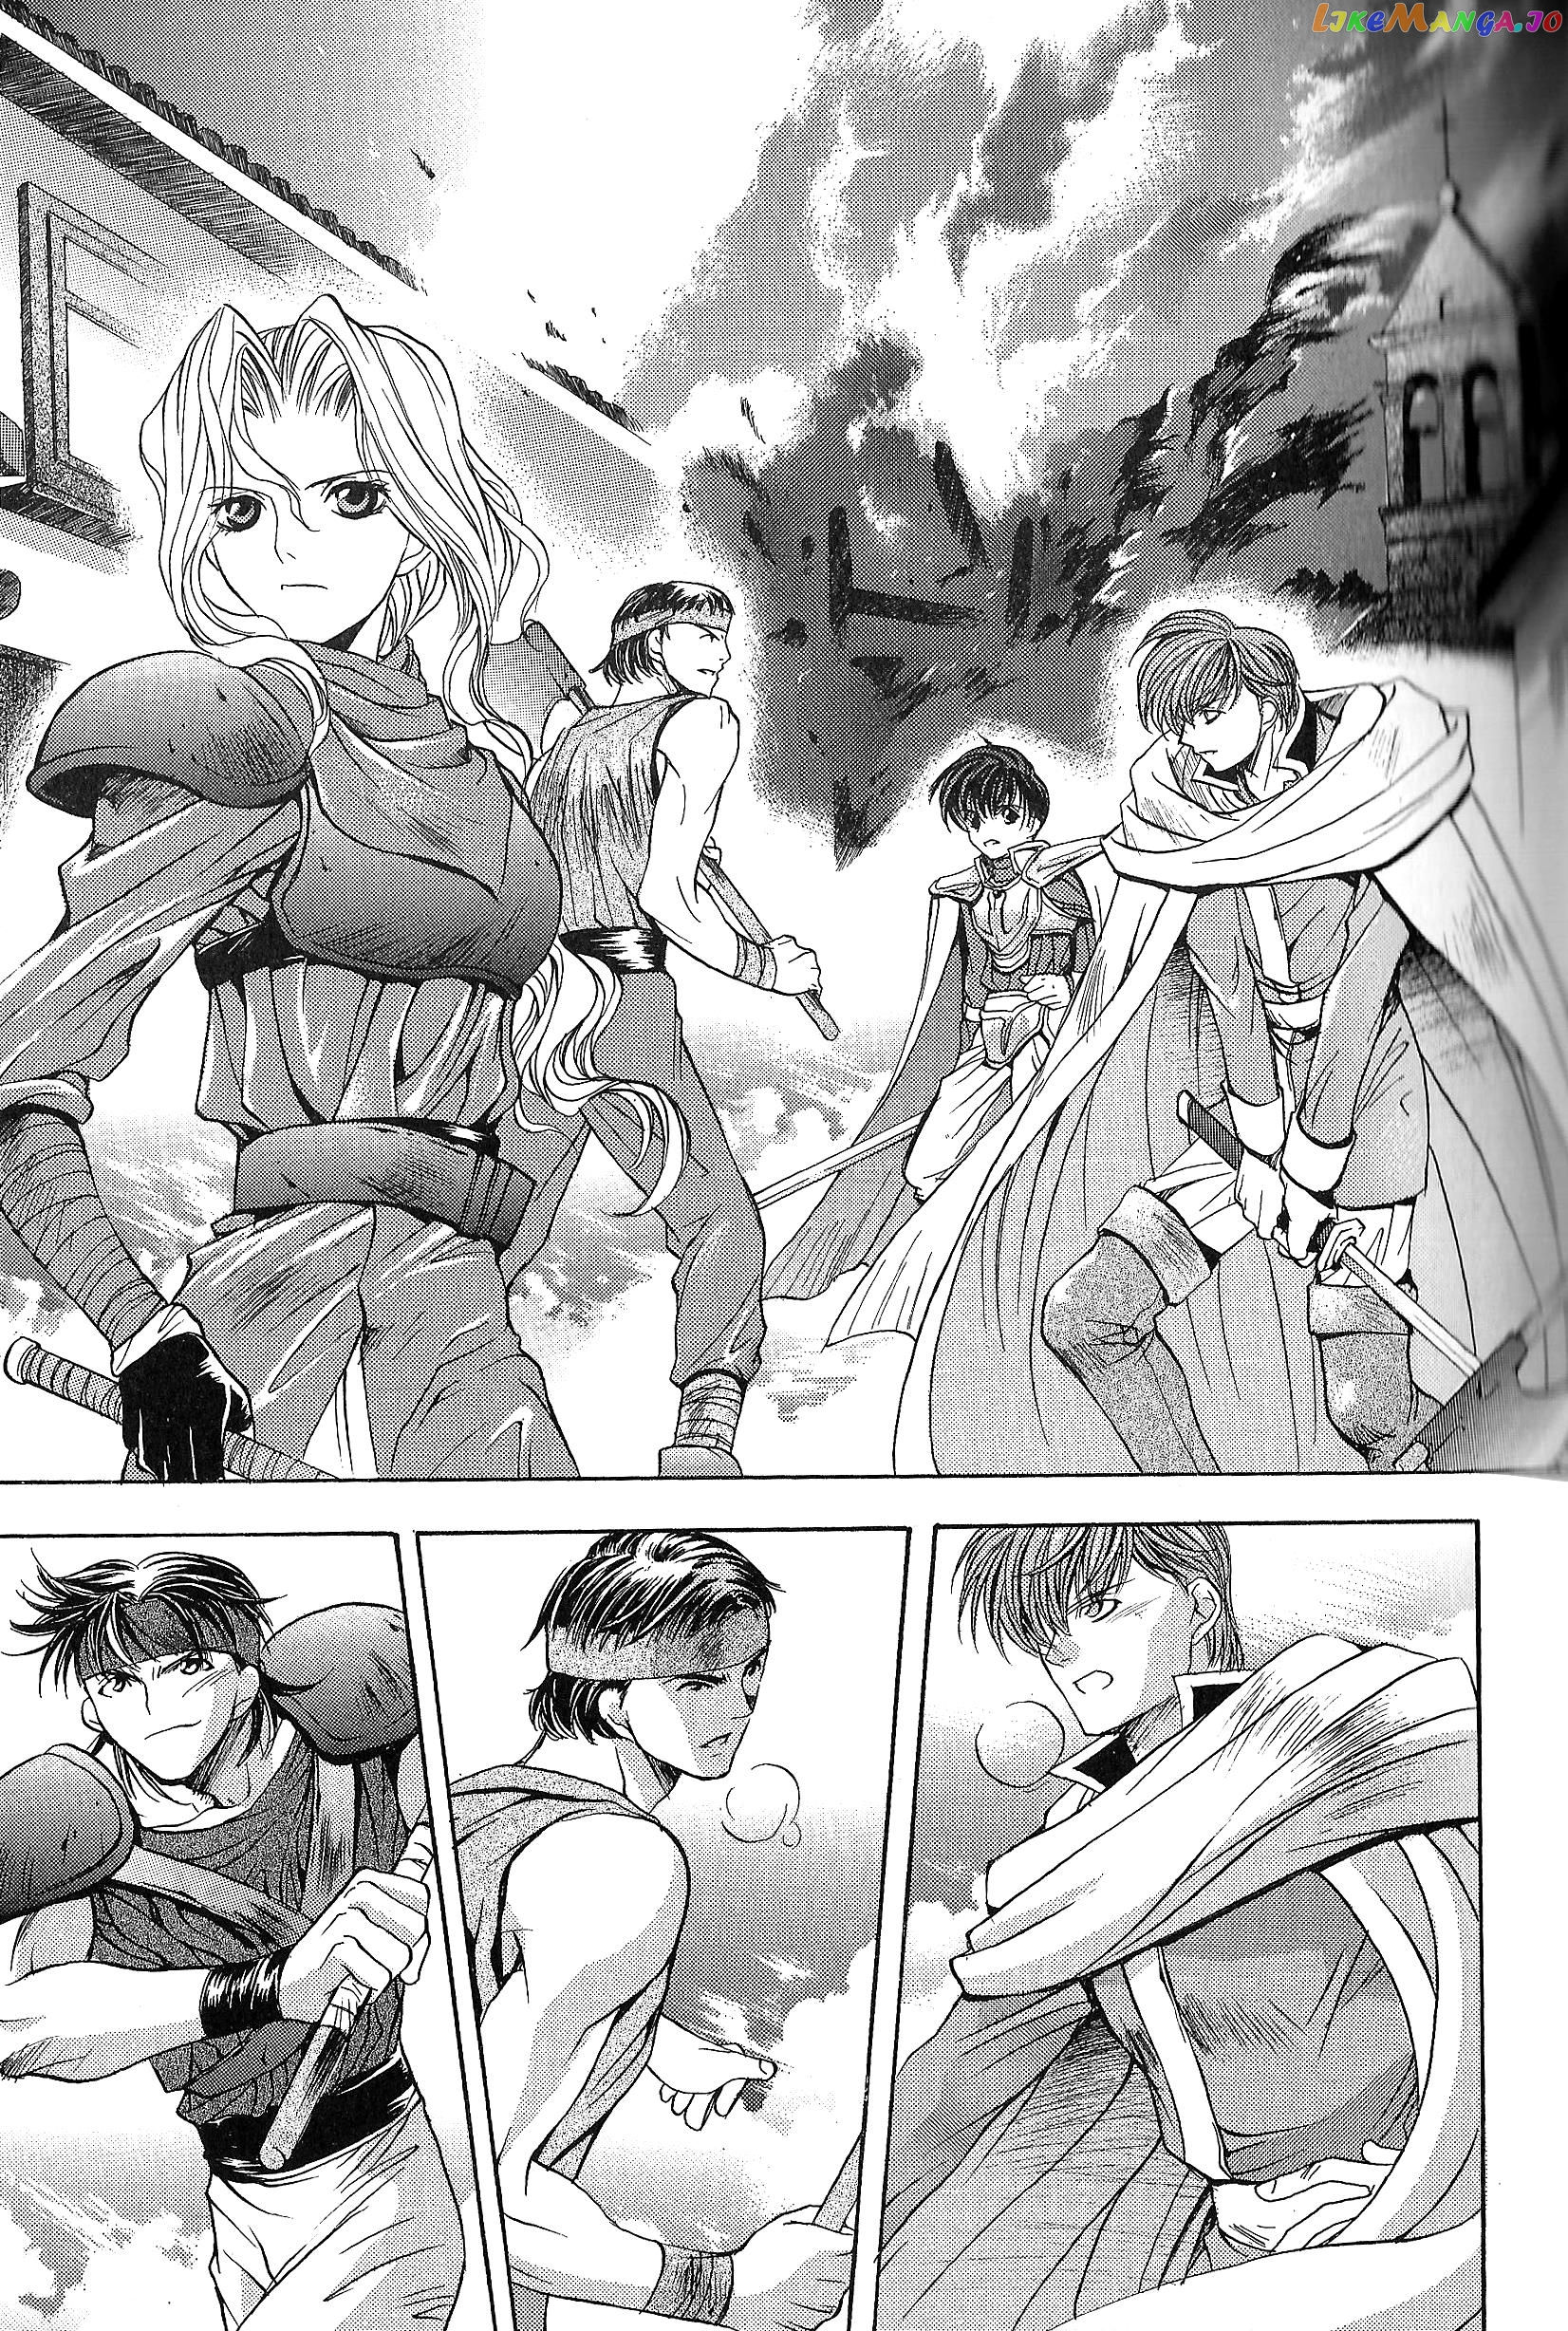 Fire Emblem - Thracia 776 vol.1 chapter 2 - page 9